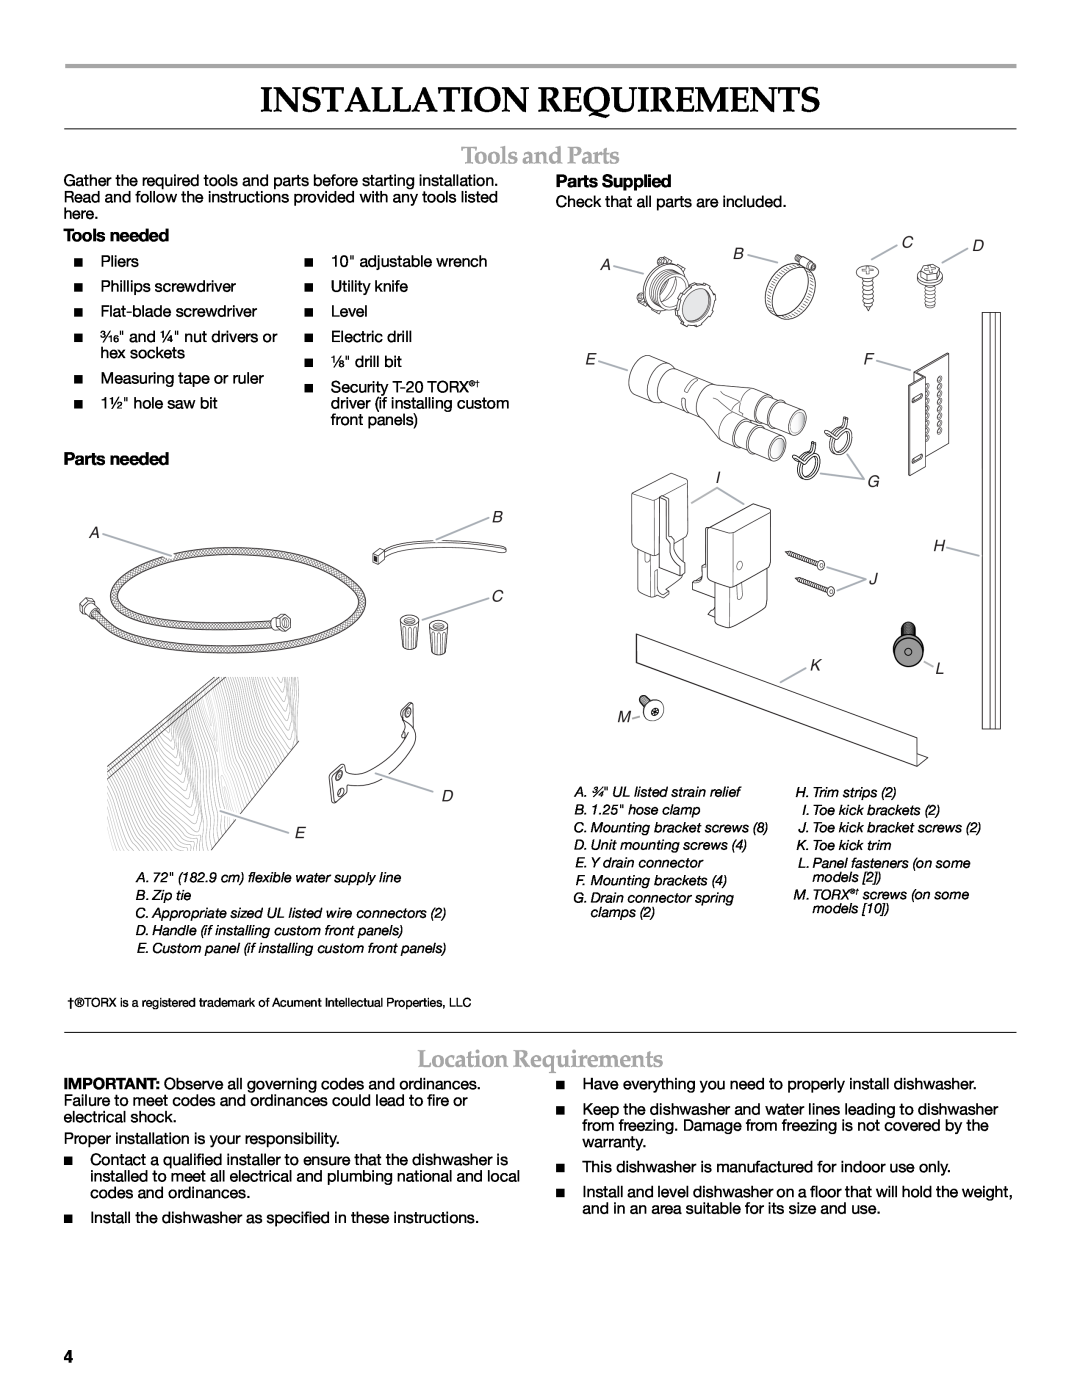 KitchenAid W10216167A Installation Requirements, Tools and Parts, Location Requirements, Tools needed, Parts needed, Bc D 